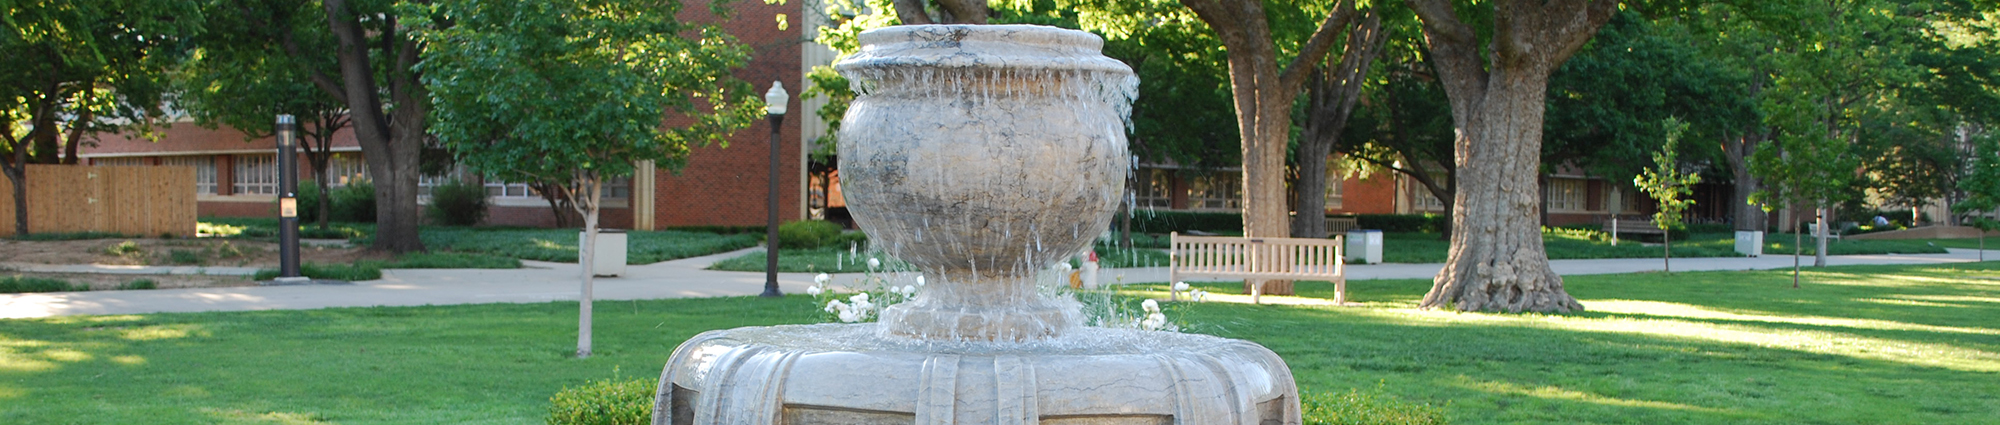 Fountain on South Oval